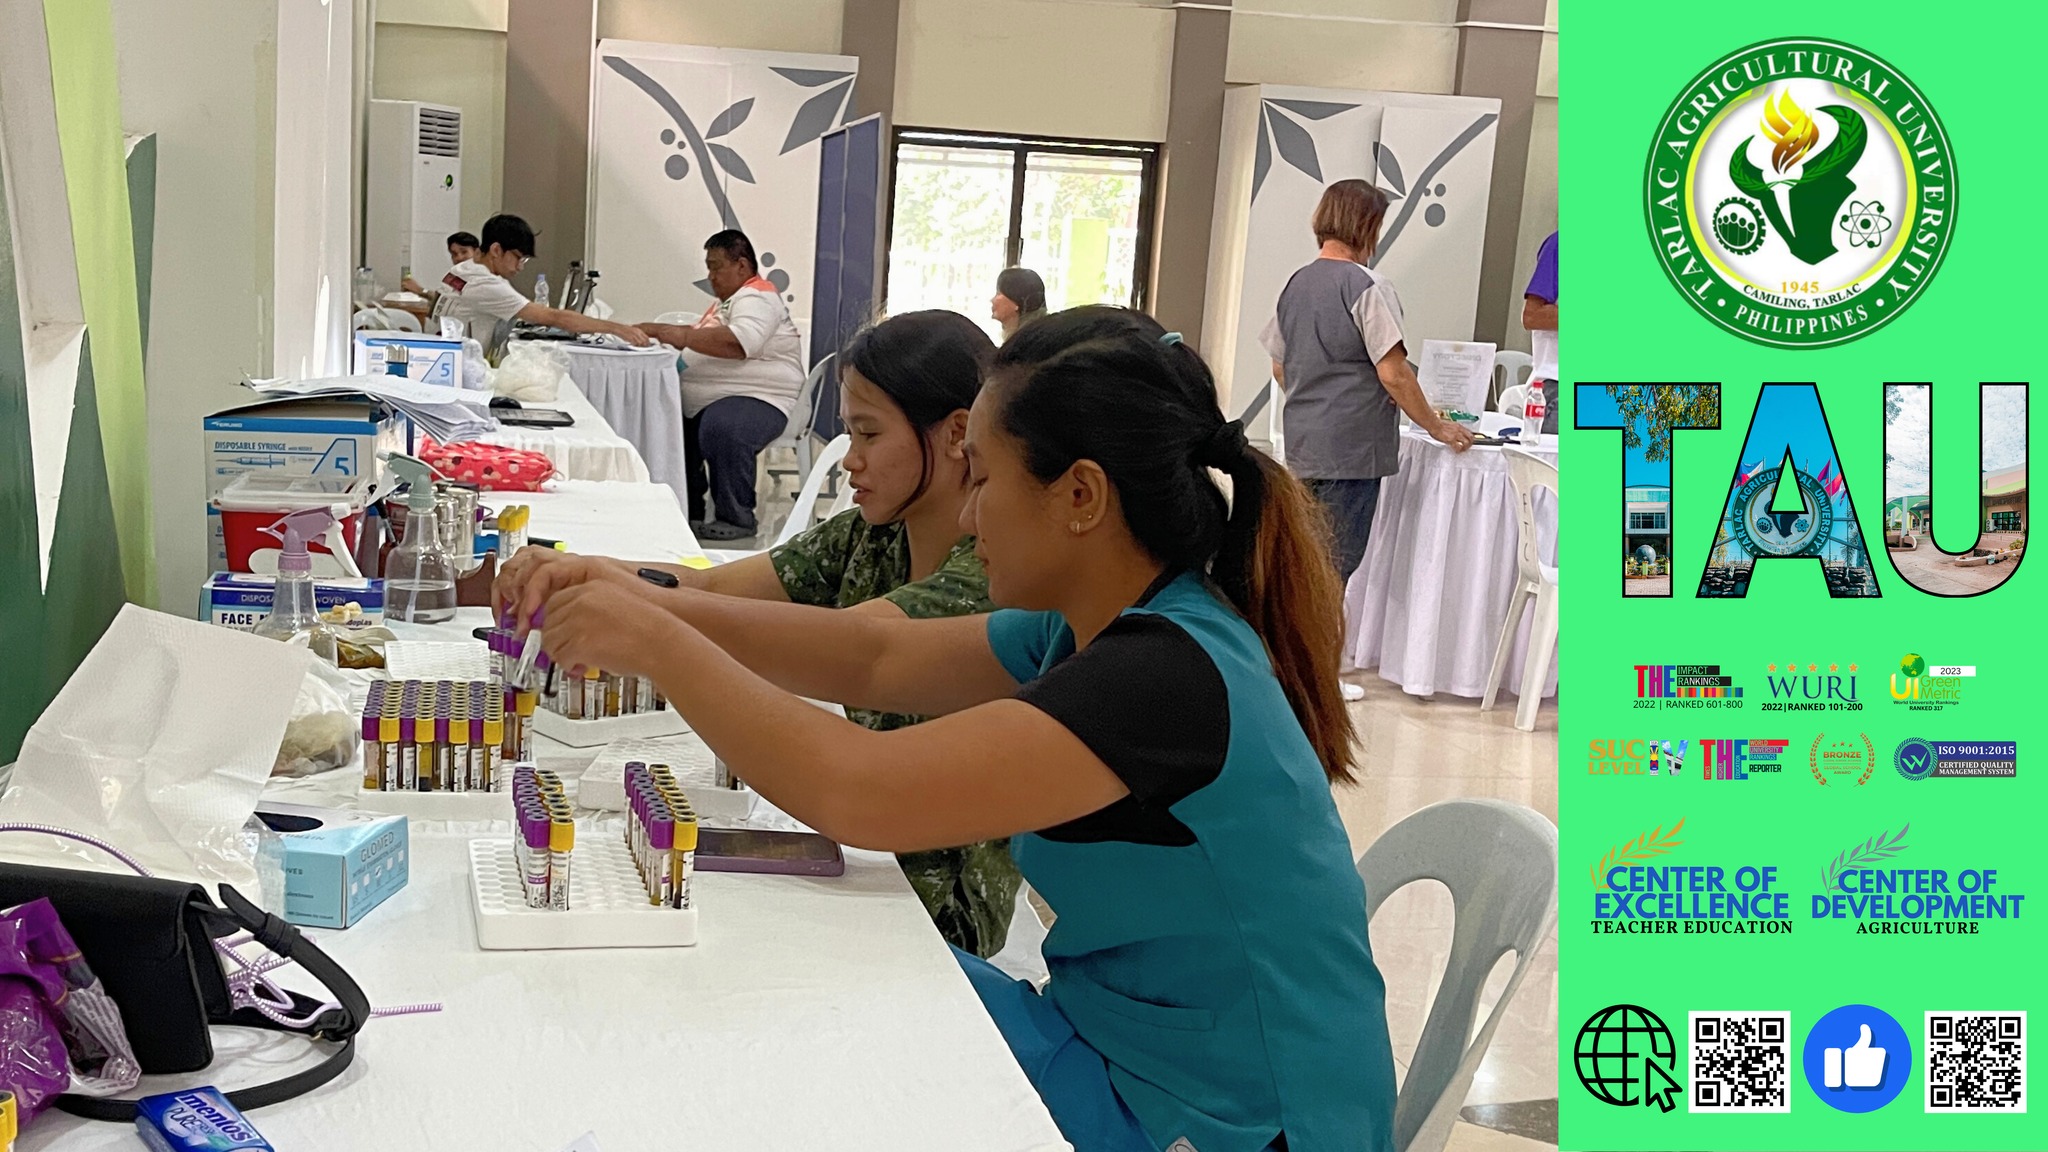 𝐂𝐀𝐏𝐓𝐔𝐑𝐄𝐃 𝐈𝐍 𝐋𝐄𝐍𝐒 | Committed to fostering a healthy workplace where all its employees maintain optimal health and well-being, the Tarlac Agricultural University (TAU), through its Medical and Dental Services Unit/Office